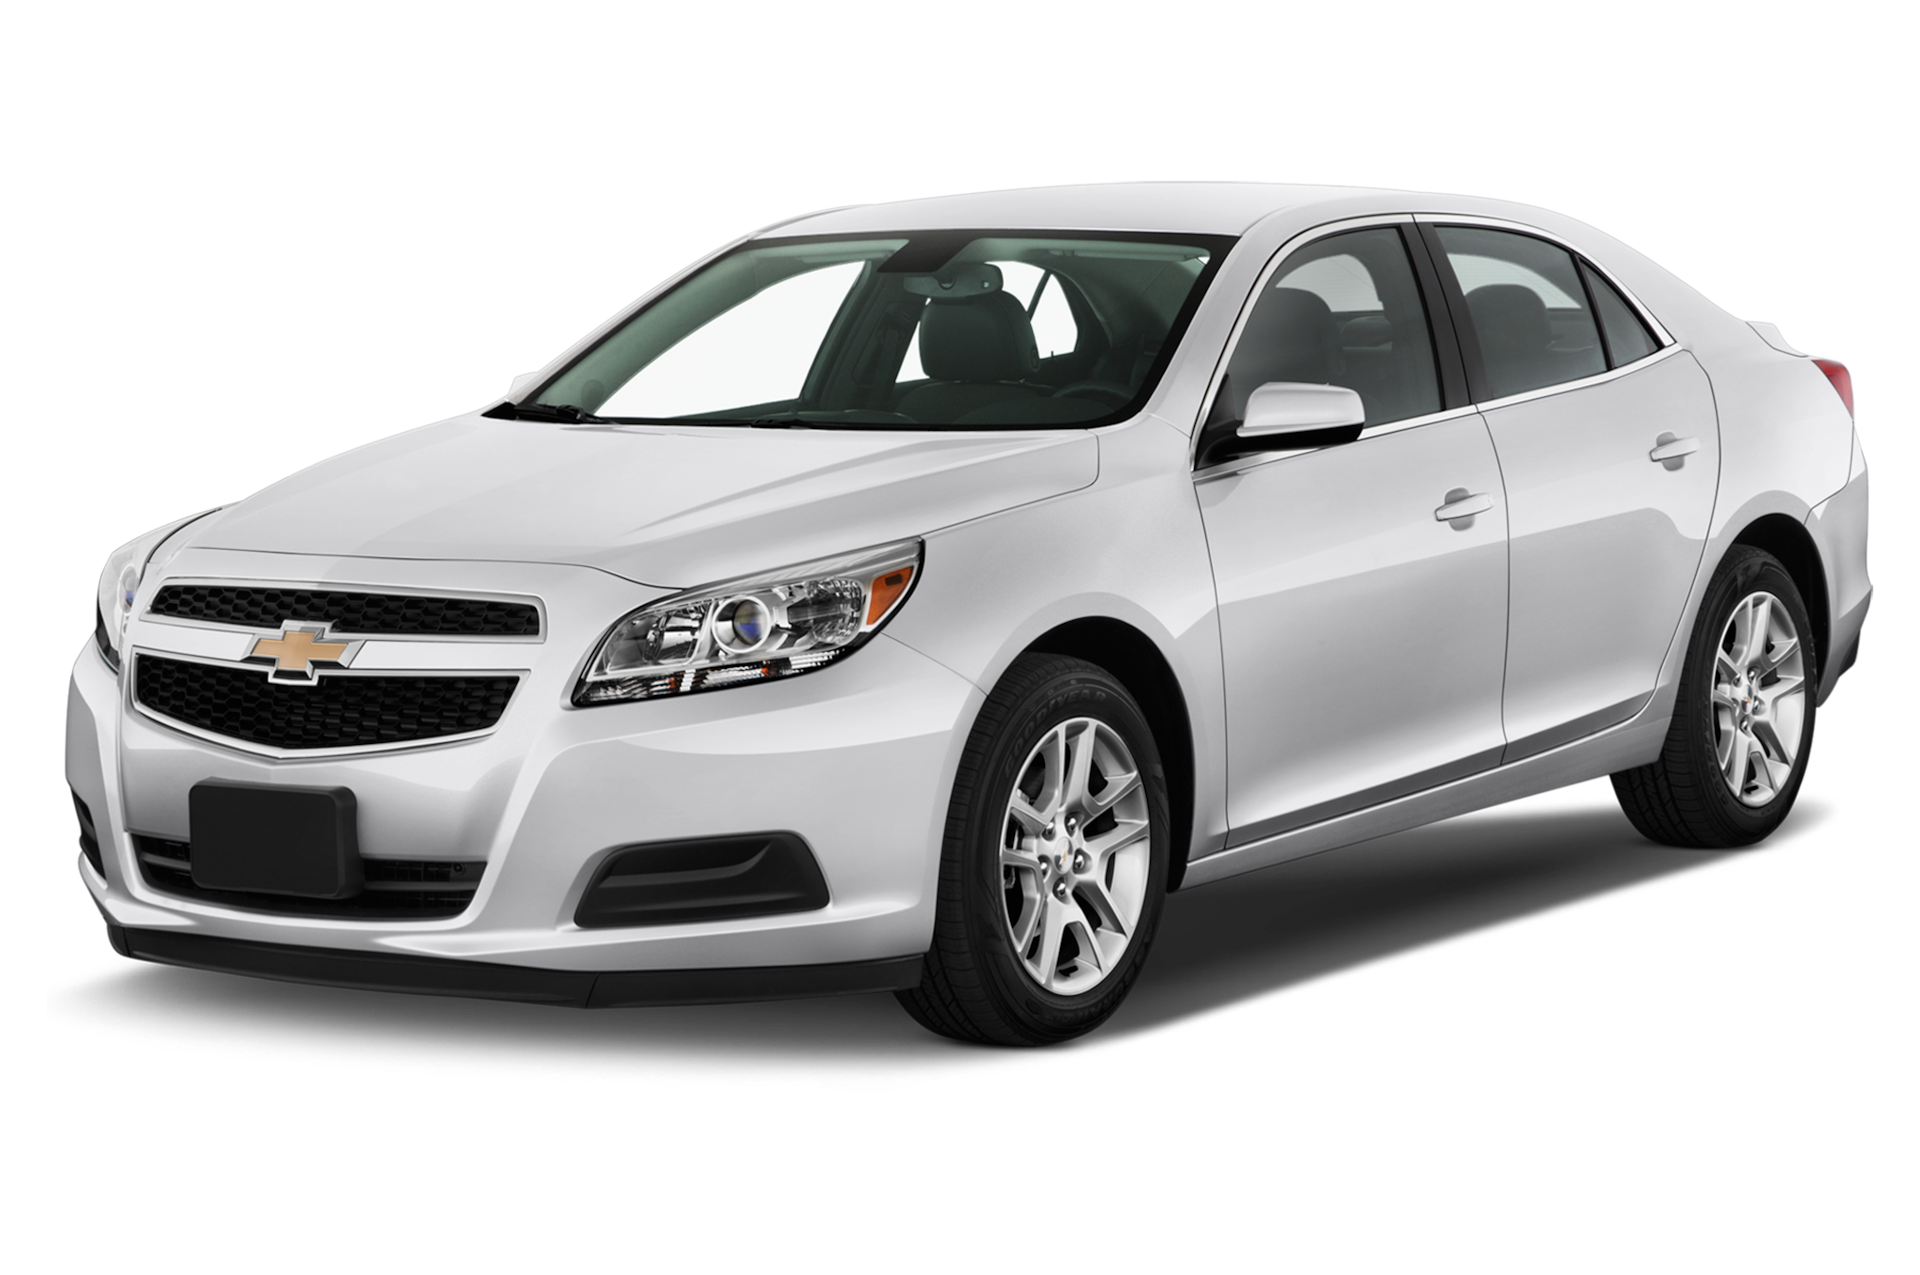 2013 Chevrolet Malibu Prices, Reviews, and Photos - MotorTrend